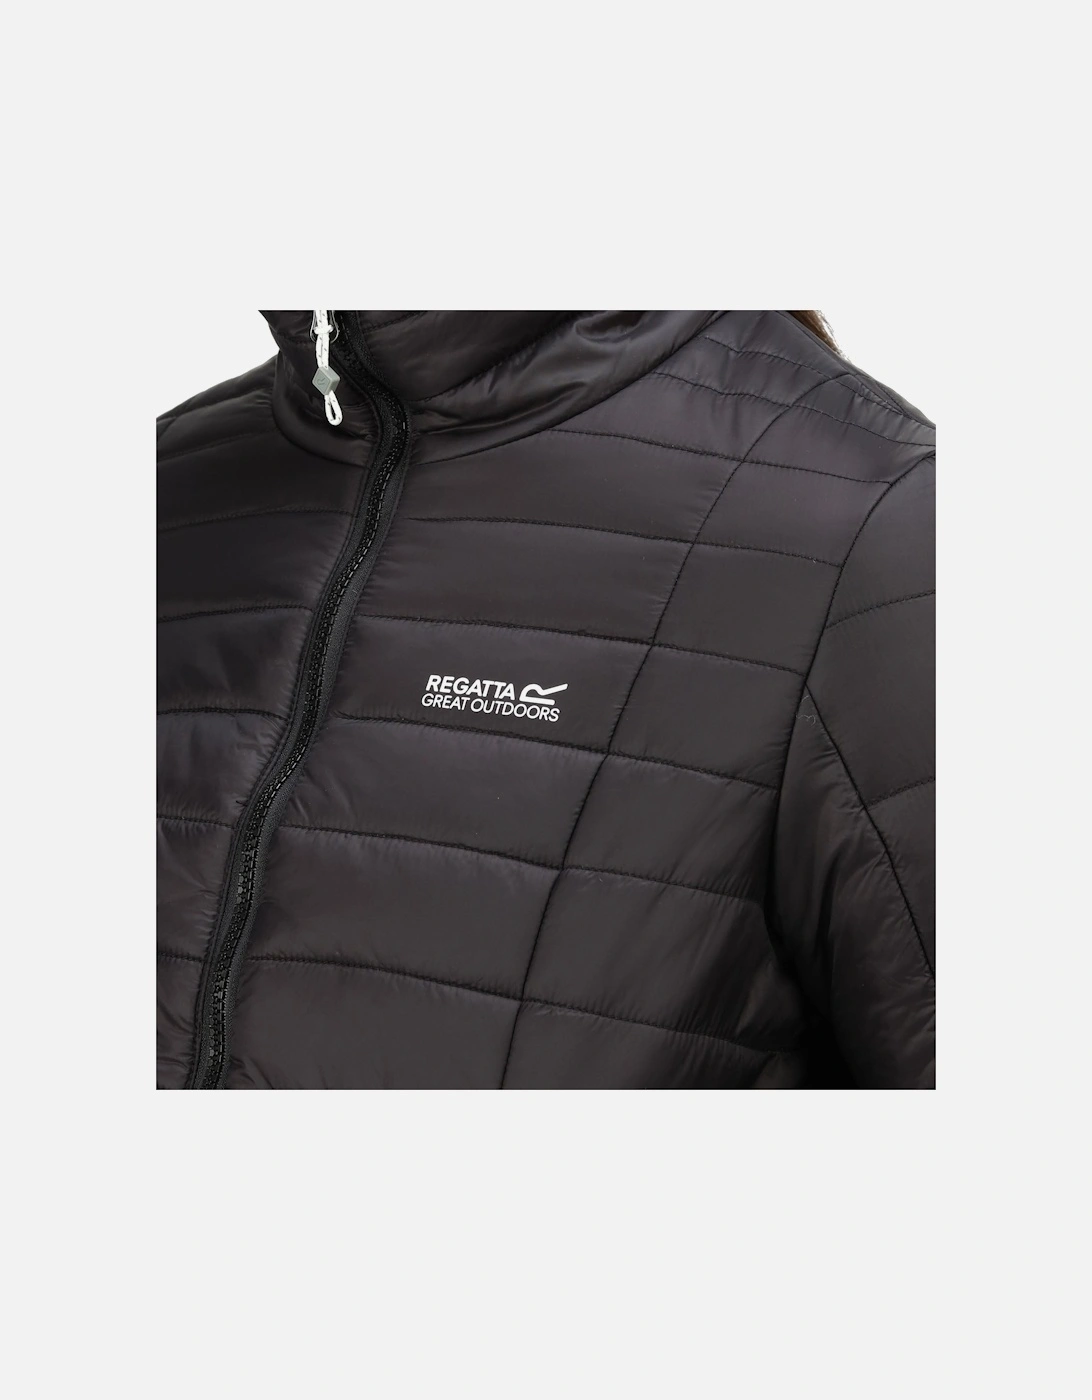 Womens Freezeway III Insulated Quilted Jacket